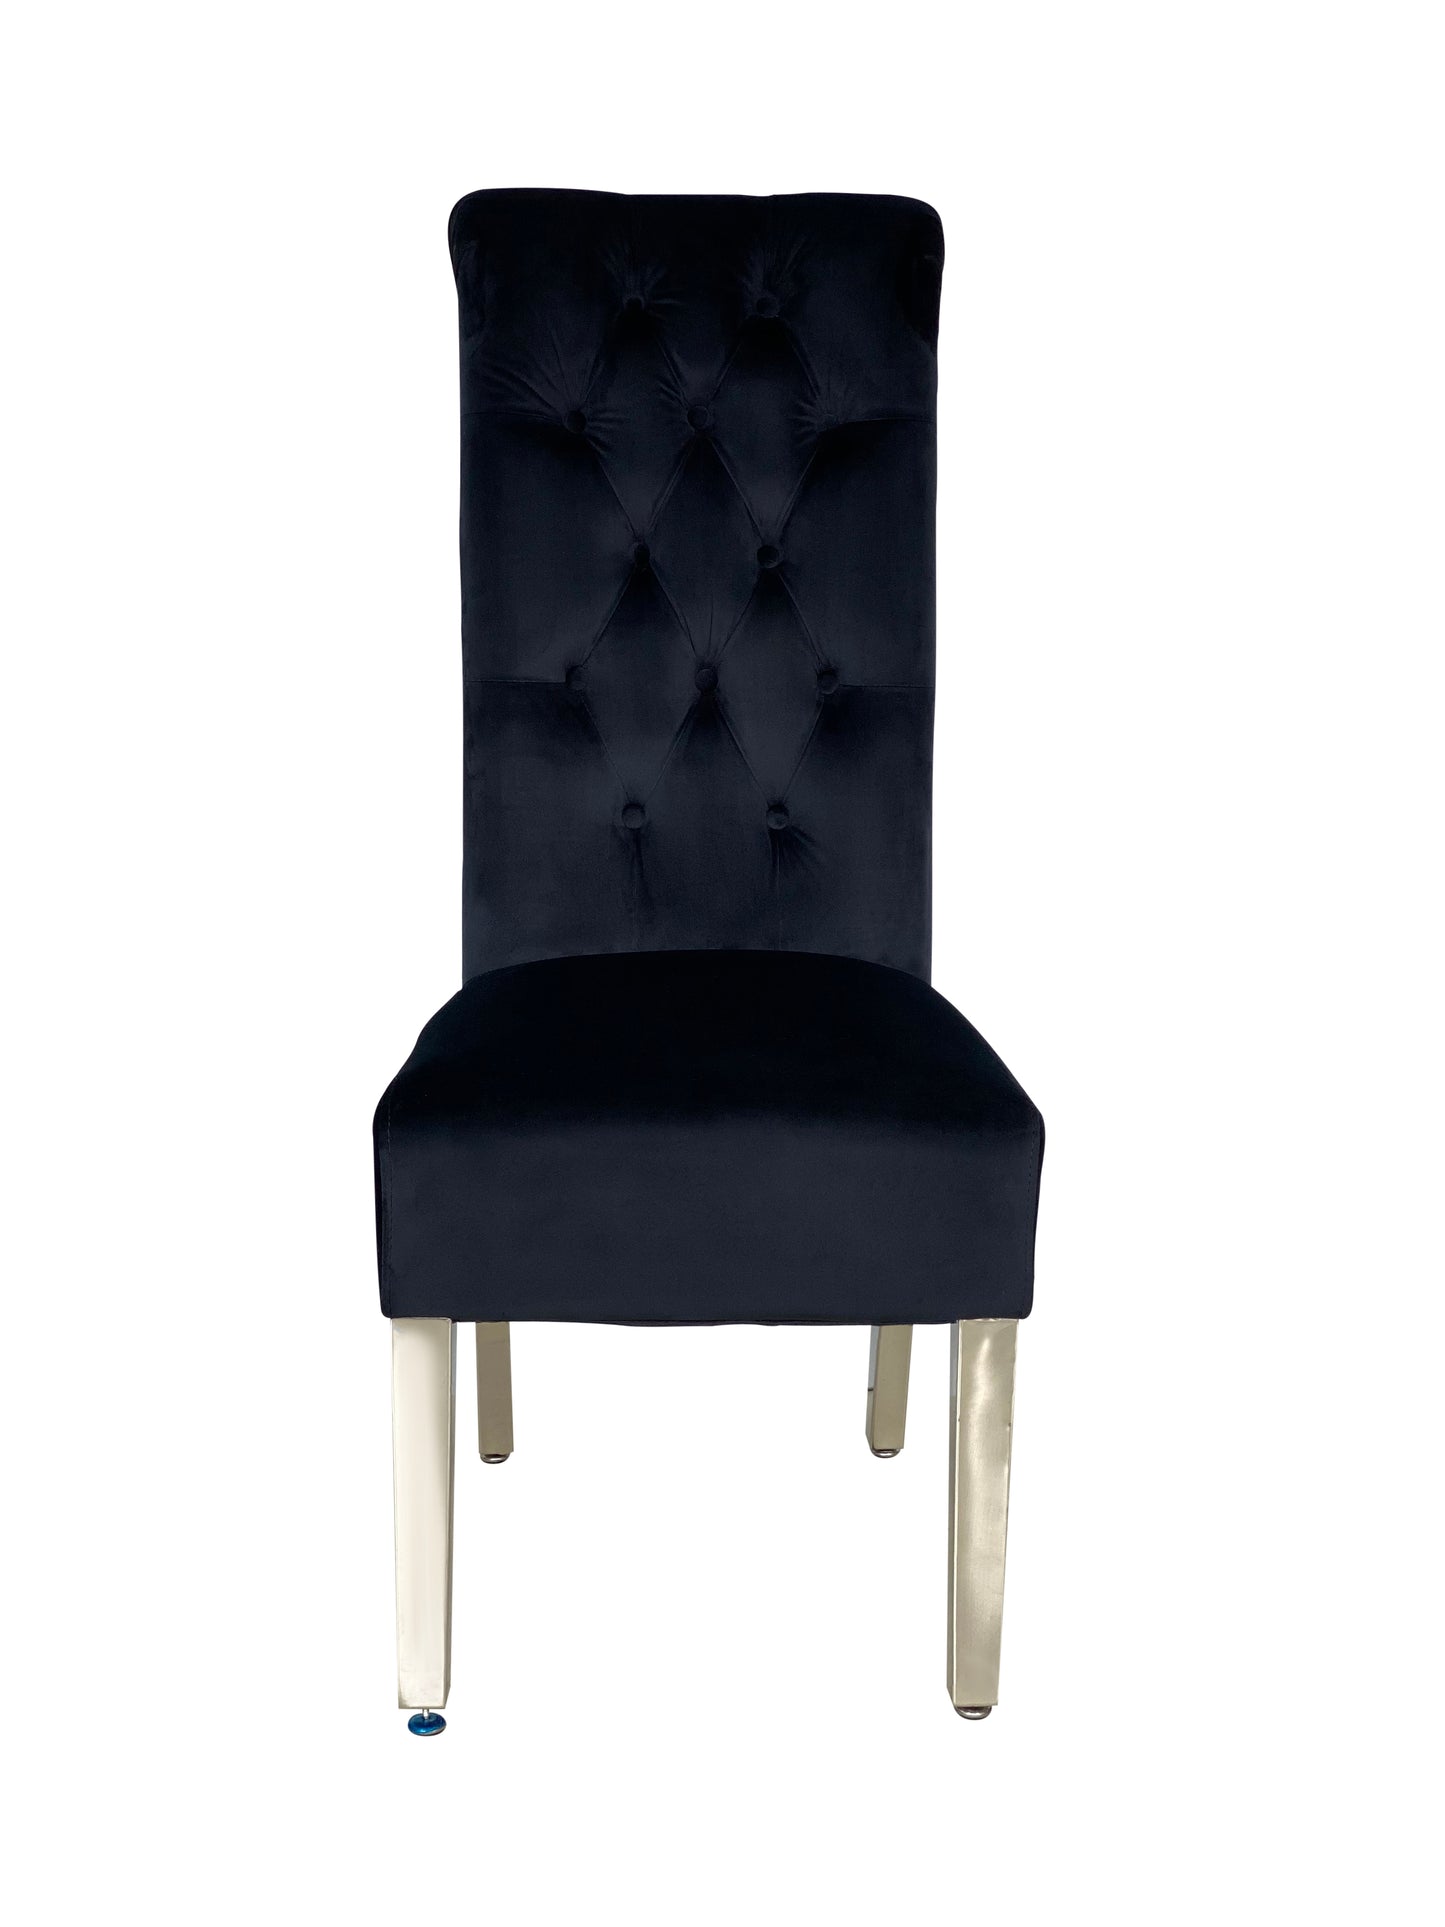 Sofa Dining Chair in Black velvet Fabric Lion Knocker Back with Chrome Polished Steel Legs (Set of 2 chairs)